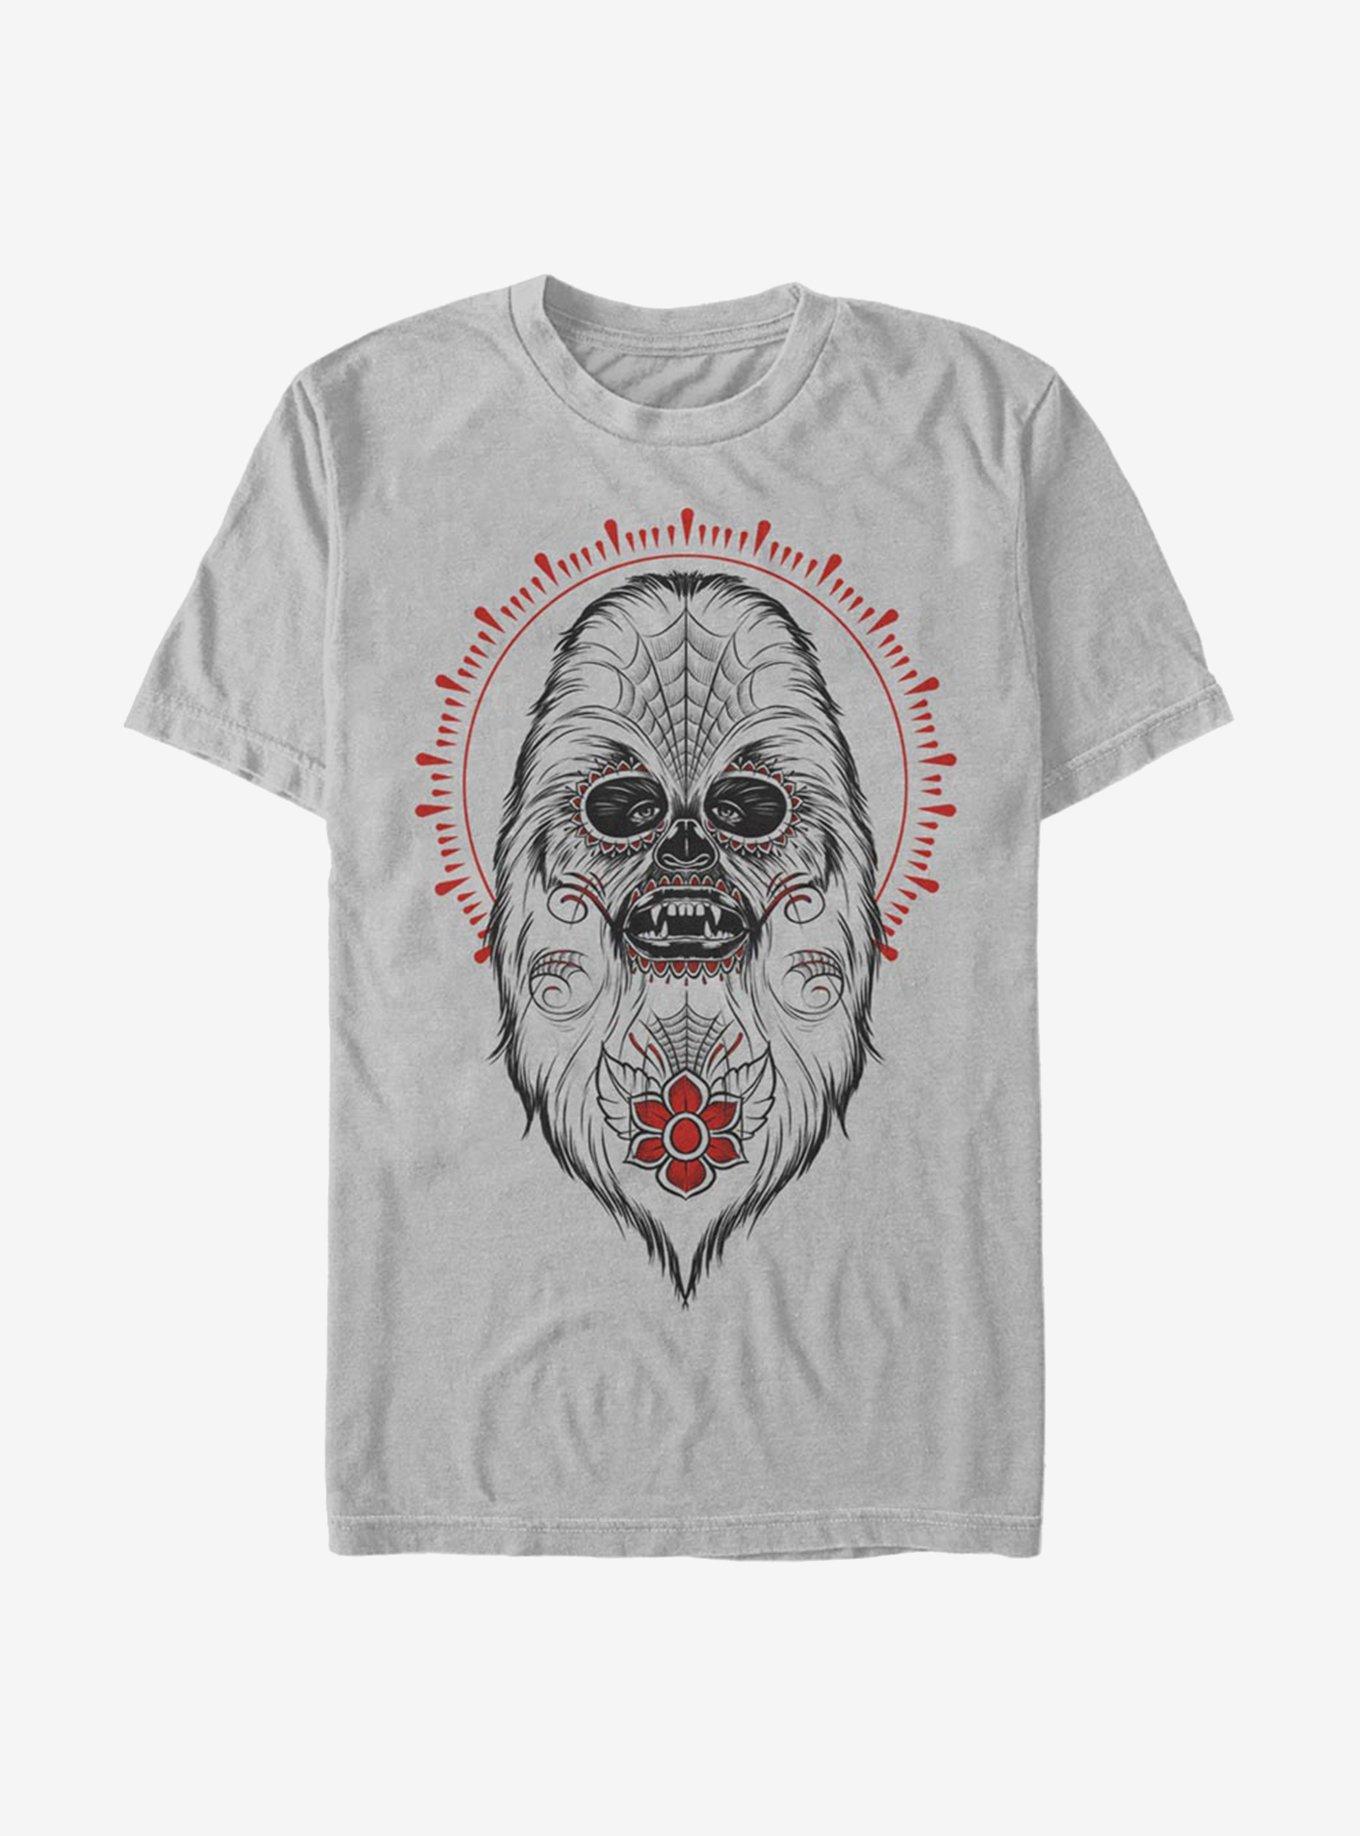 Star Wars Day Of The Dead Chewbacca T-Shirt, SILVER, hi-res